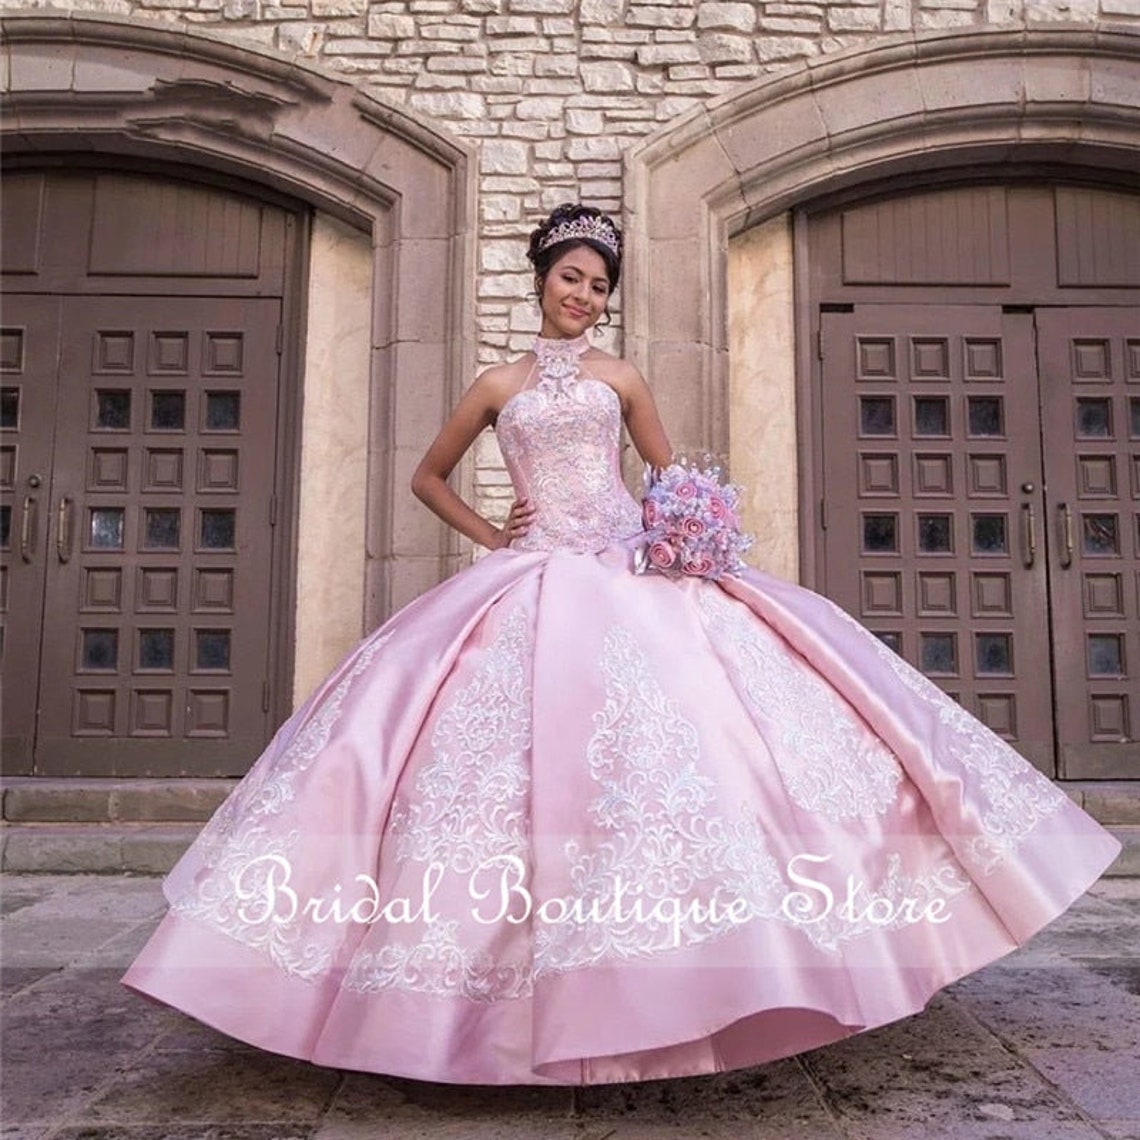 Lovely Ball Gown Quinceanera Dresses 2021 Halter Lace Applique - Etsy